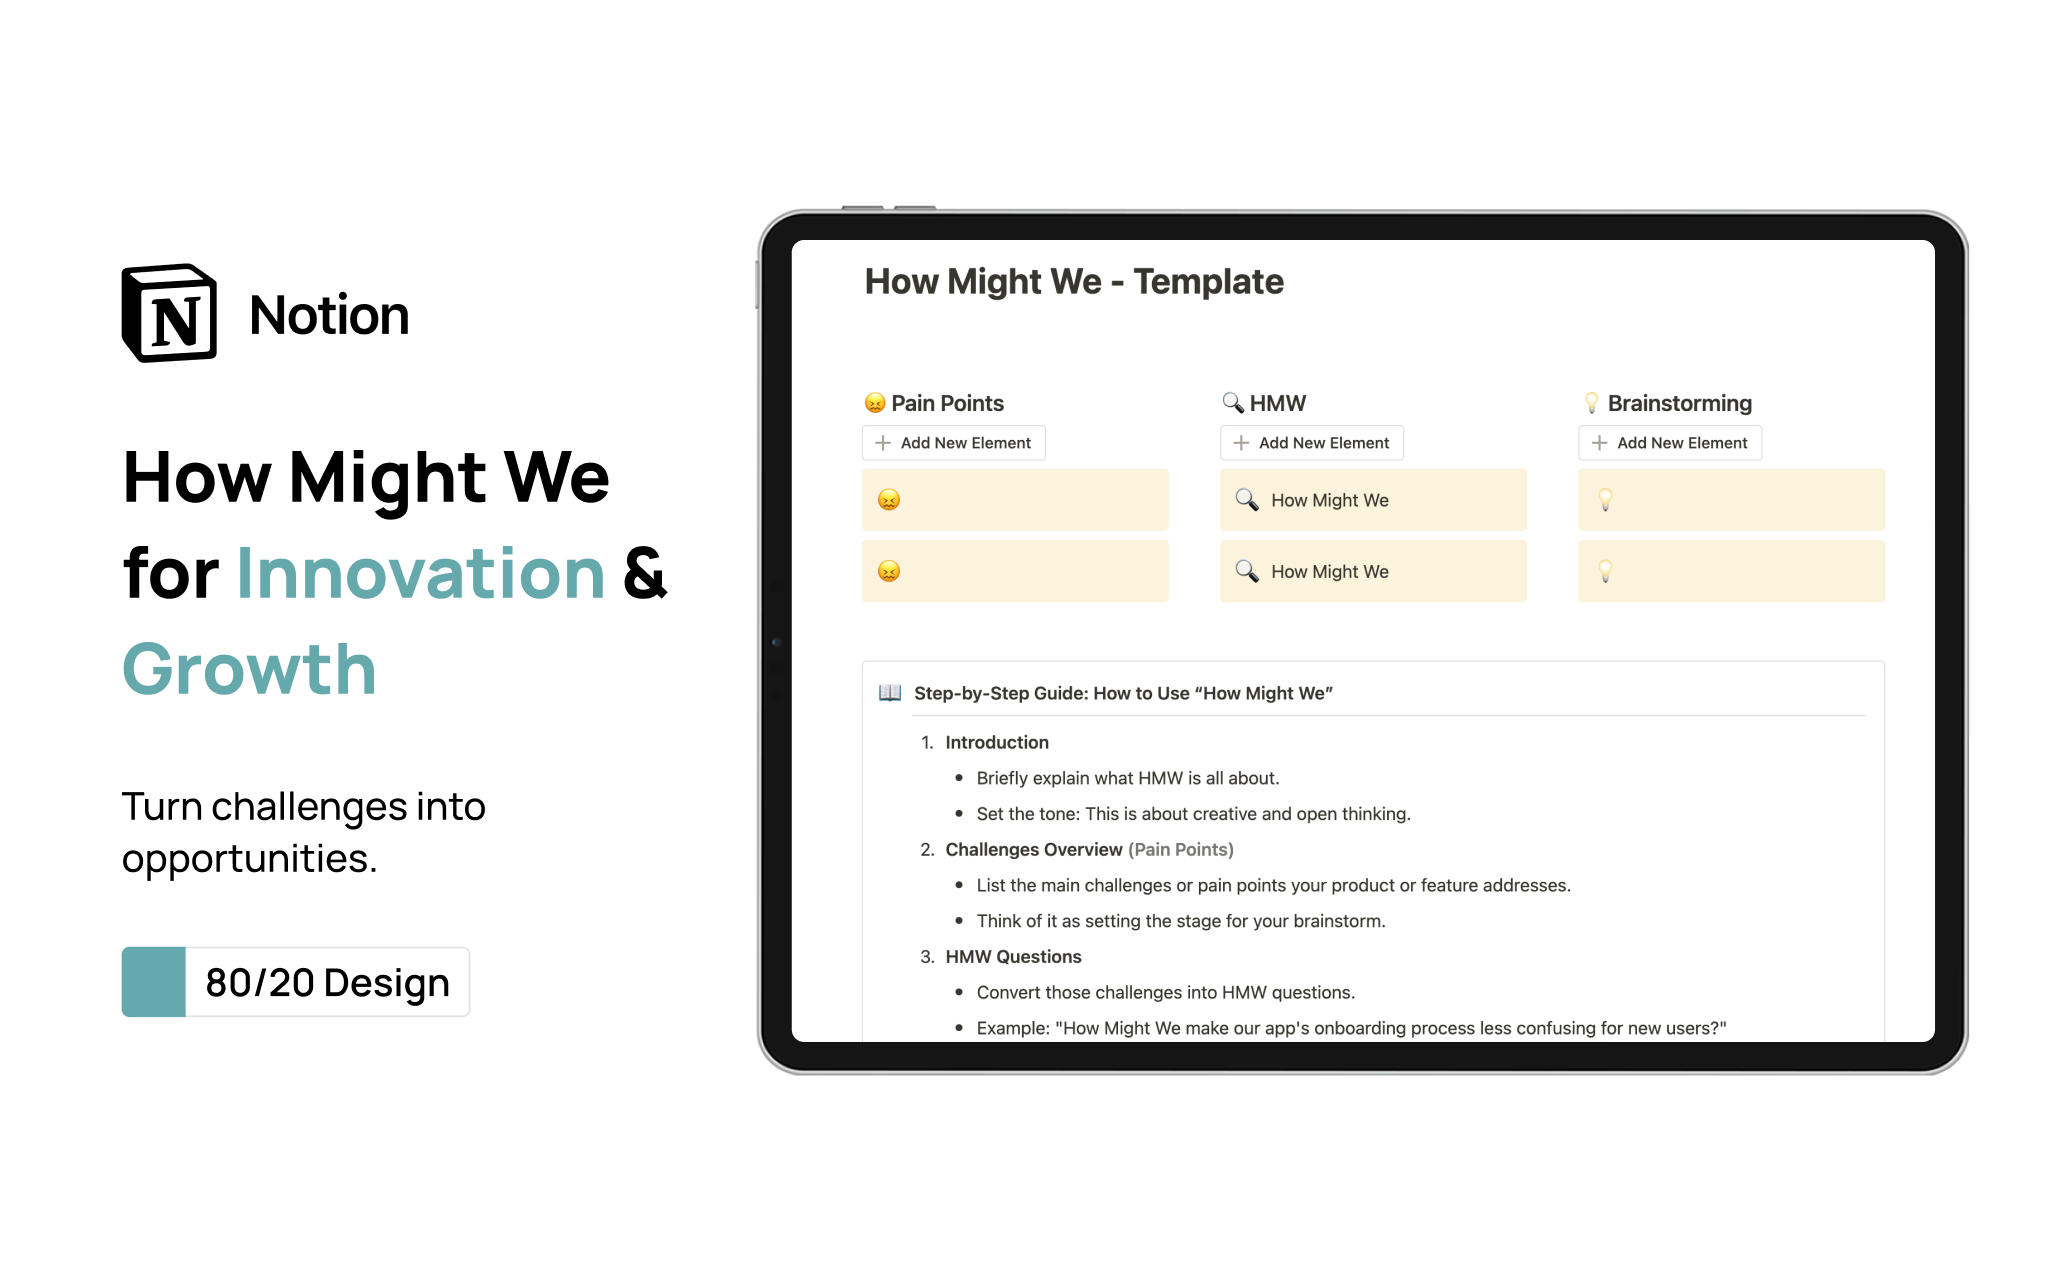 Spark innovation with the free “💡 How Might We” template from 80/20 Design. Perfect for solopreneurs and startups, it's your gateway to creative problem-solving and is part of our "Product Manual" series 🚀.
Explore more at www.8020d.com